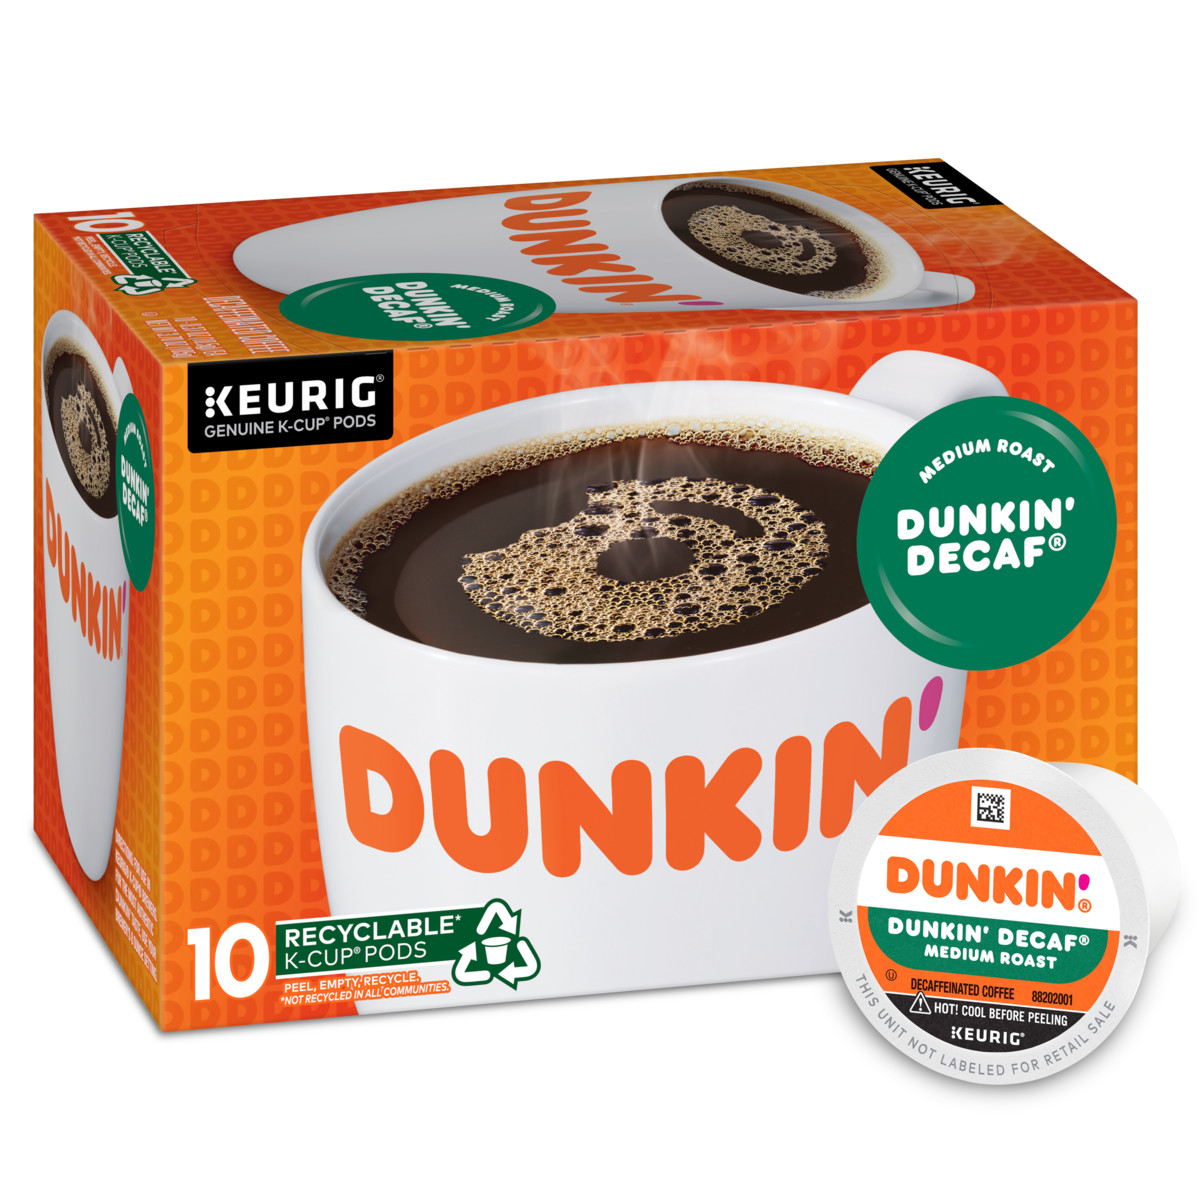 Dunkin'® Decaf Coffee K-Cup® pods in an orange box with an image of a white mug filled with steaming coffee on it and a K-Cup® pod on its side in the foreground